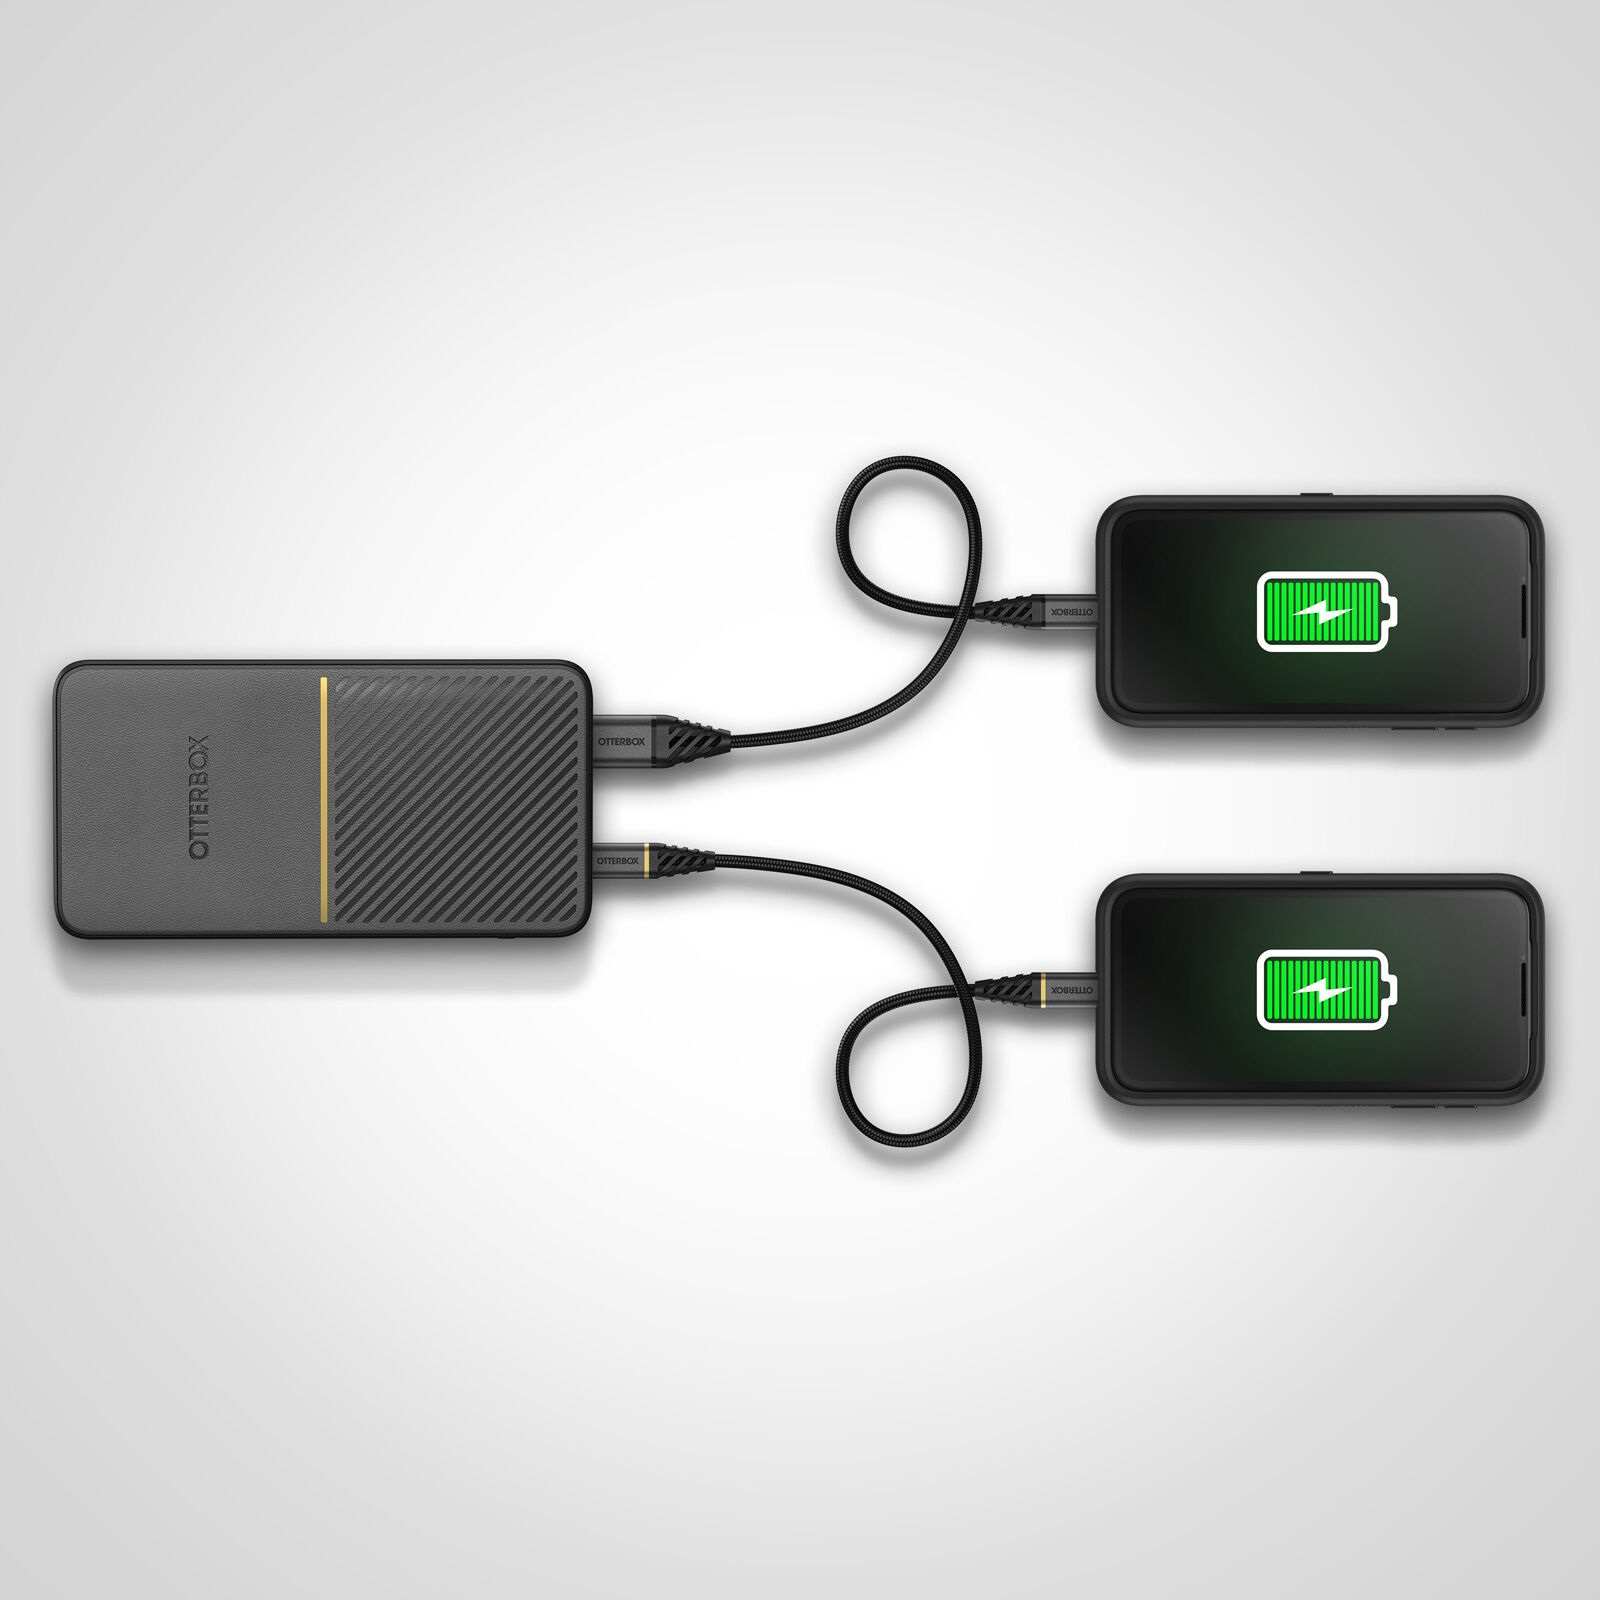 A large marketing image providing additional information about the product OtterBox Fast Charge Power Bank 20K mAh - Black - Additional alt info not provided